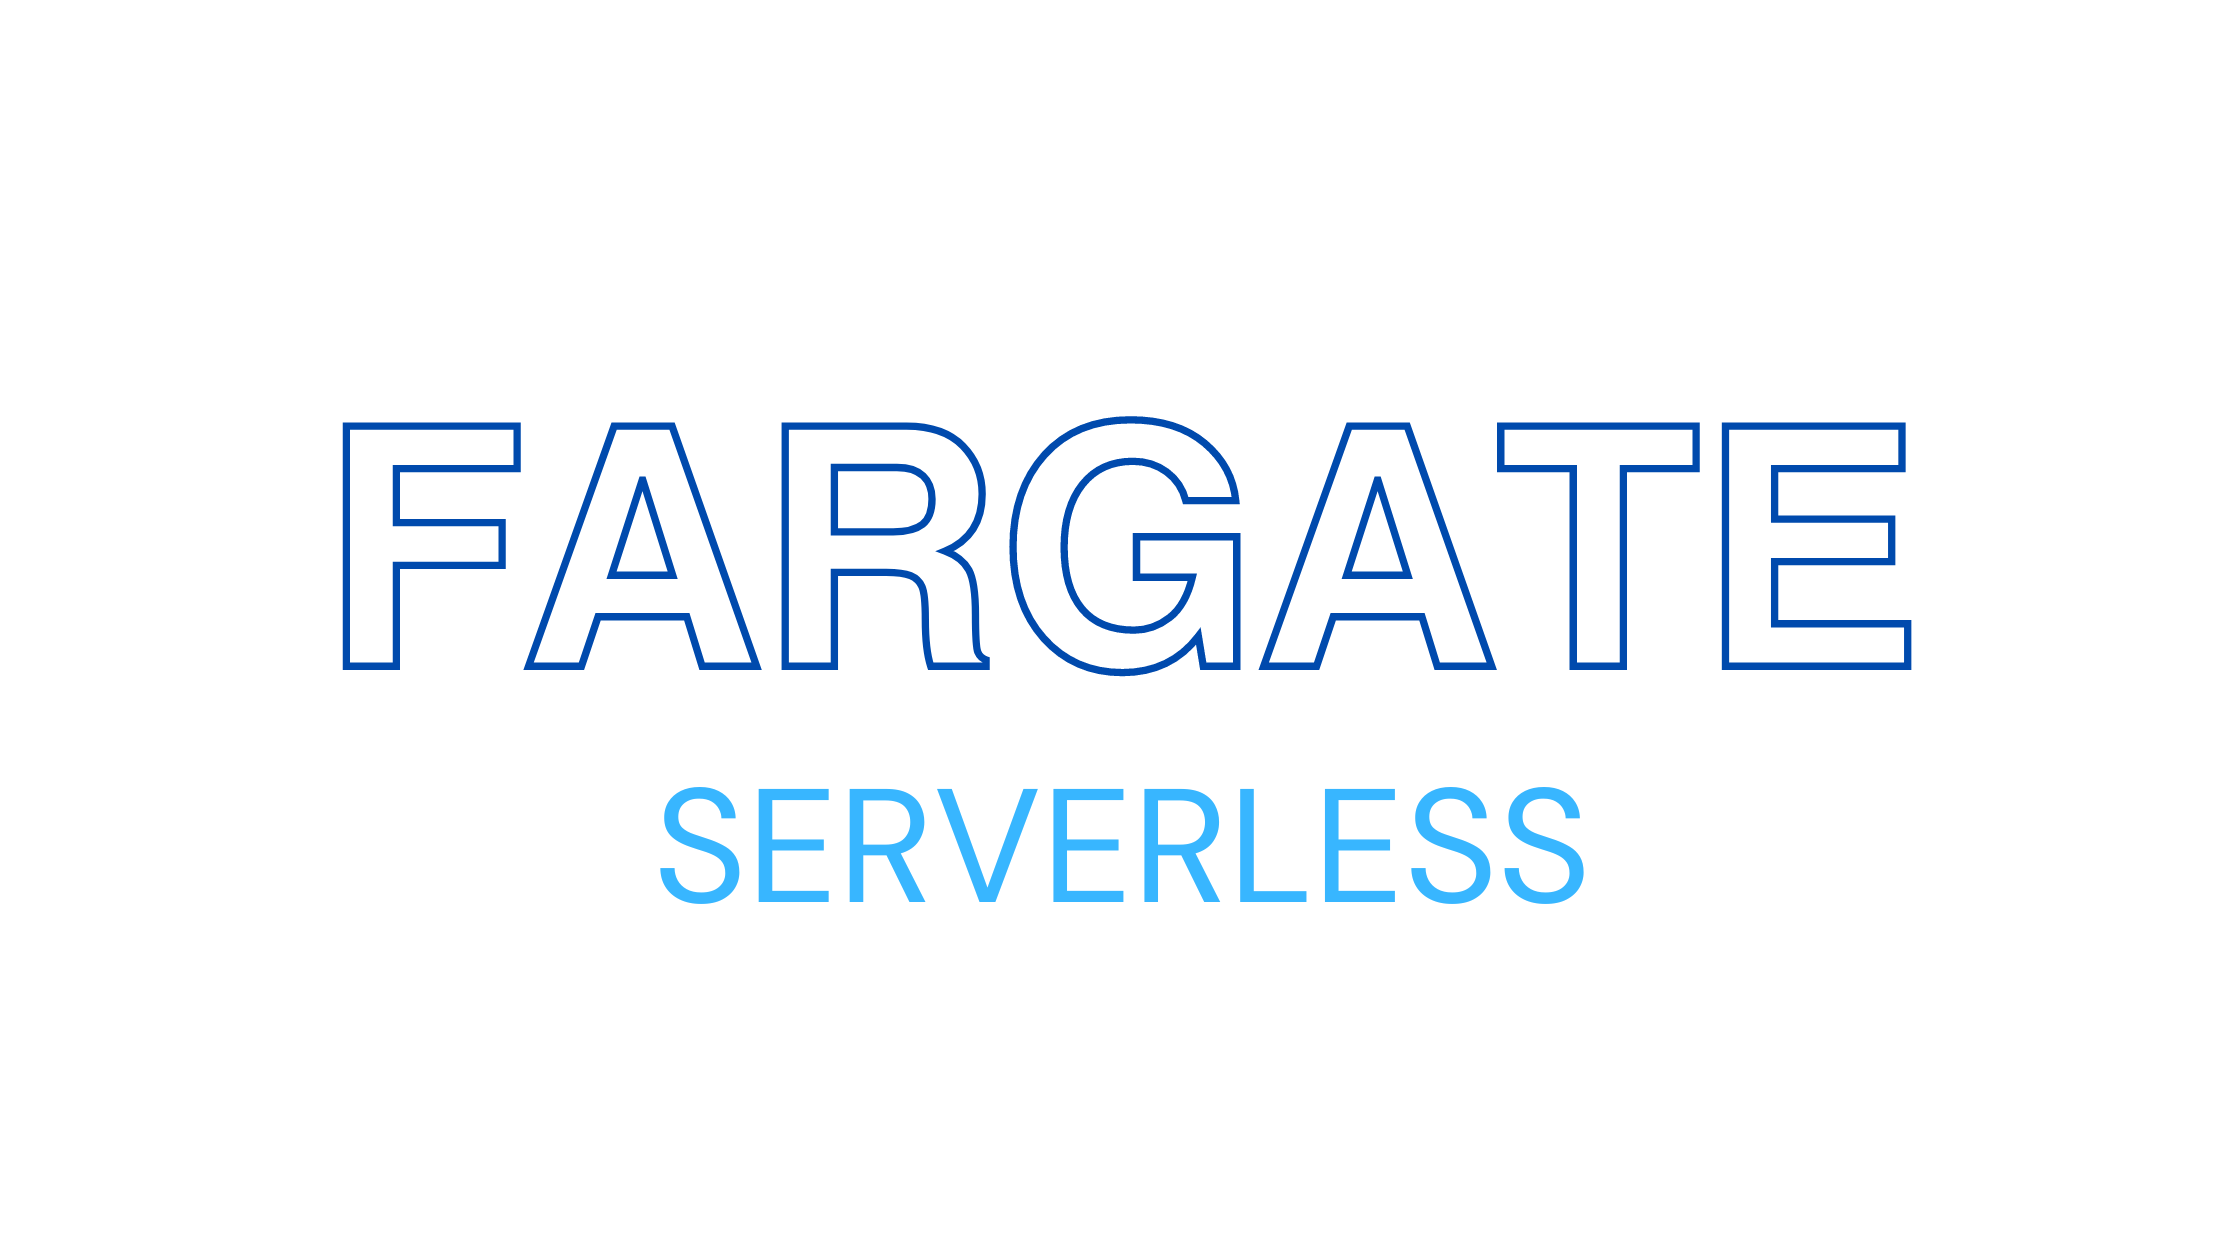 AWS Fargate for Serverless Containers